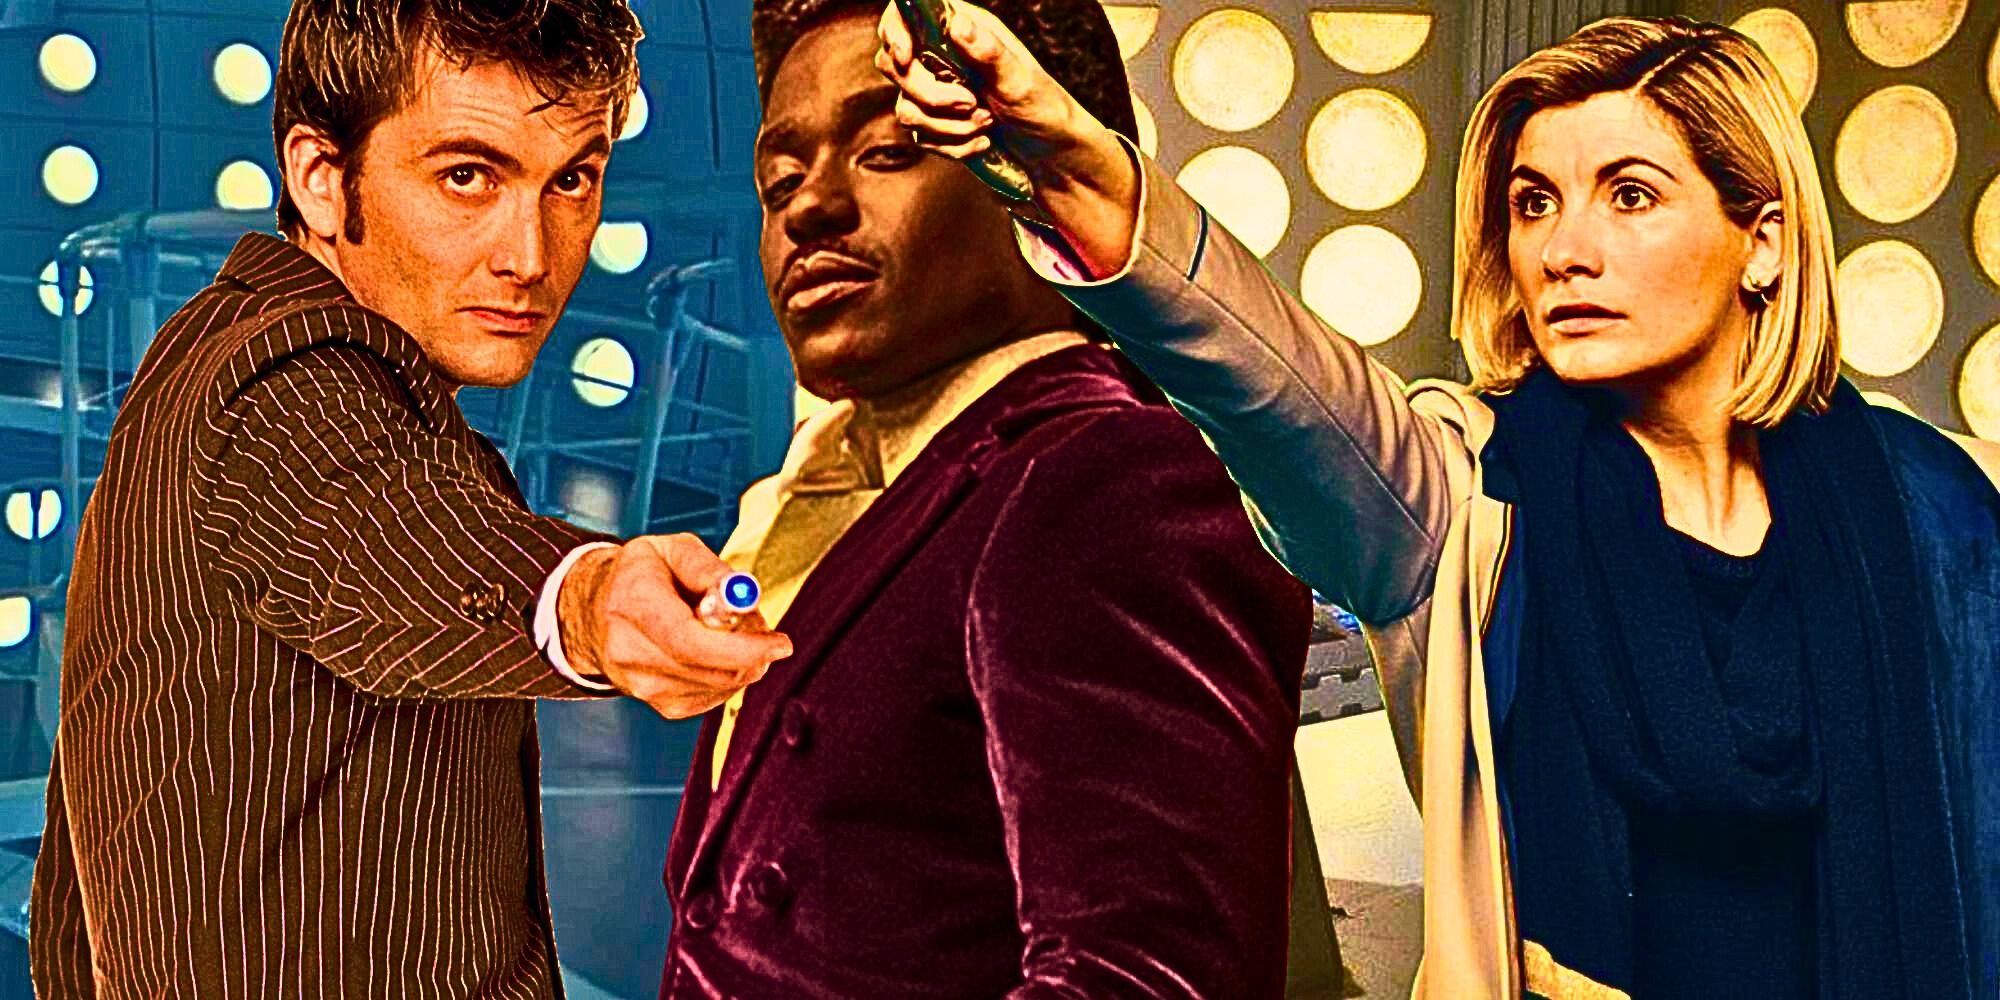 A custom Doctor Who image of David Tennant's Tenth Doctor, Ncuti Gatwa's Fifteenth Doctor, and Jodie Whittaker's Thirteenth Docto